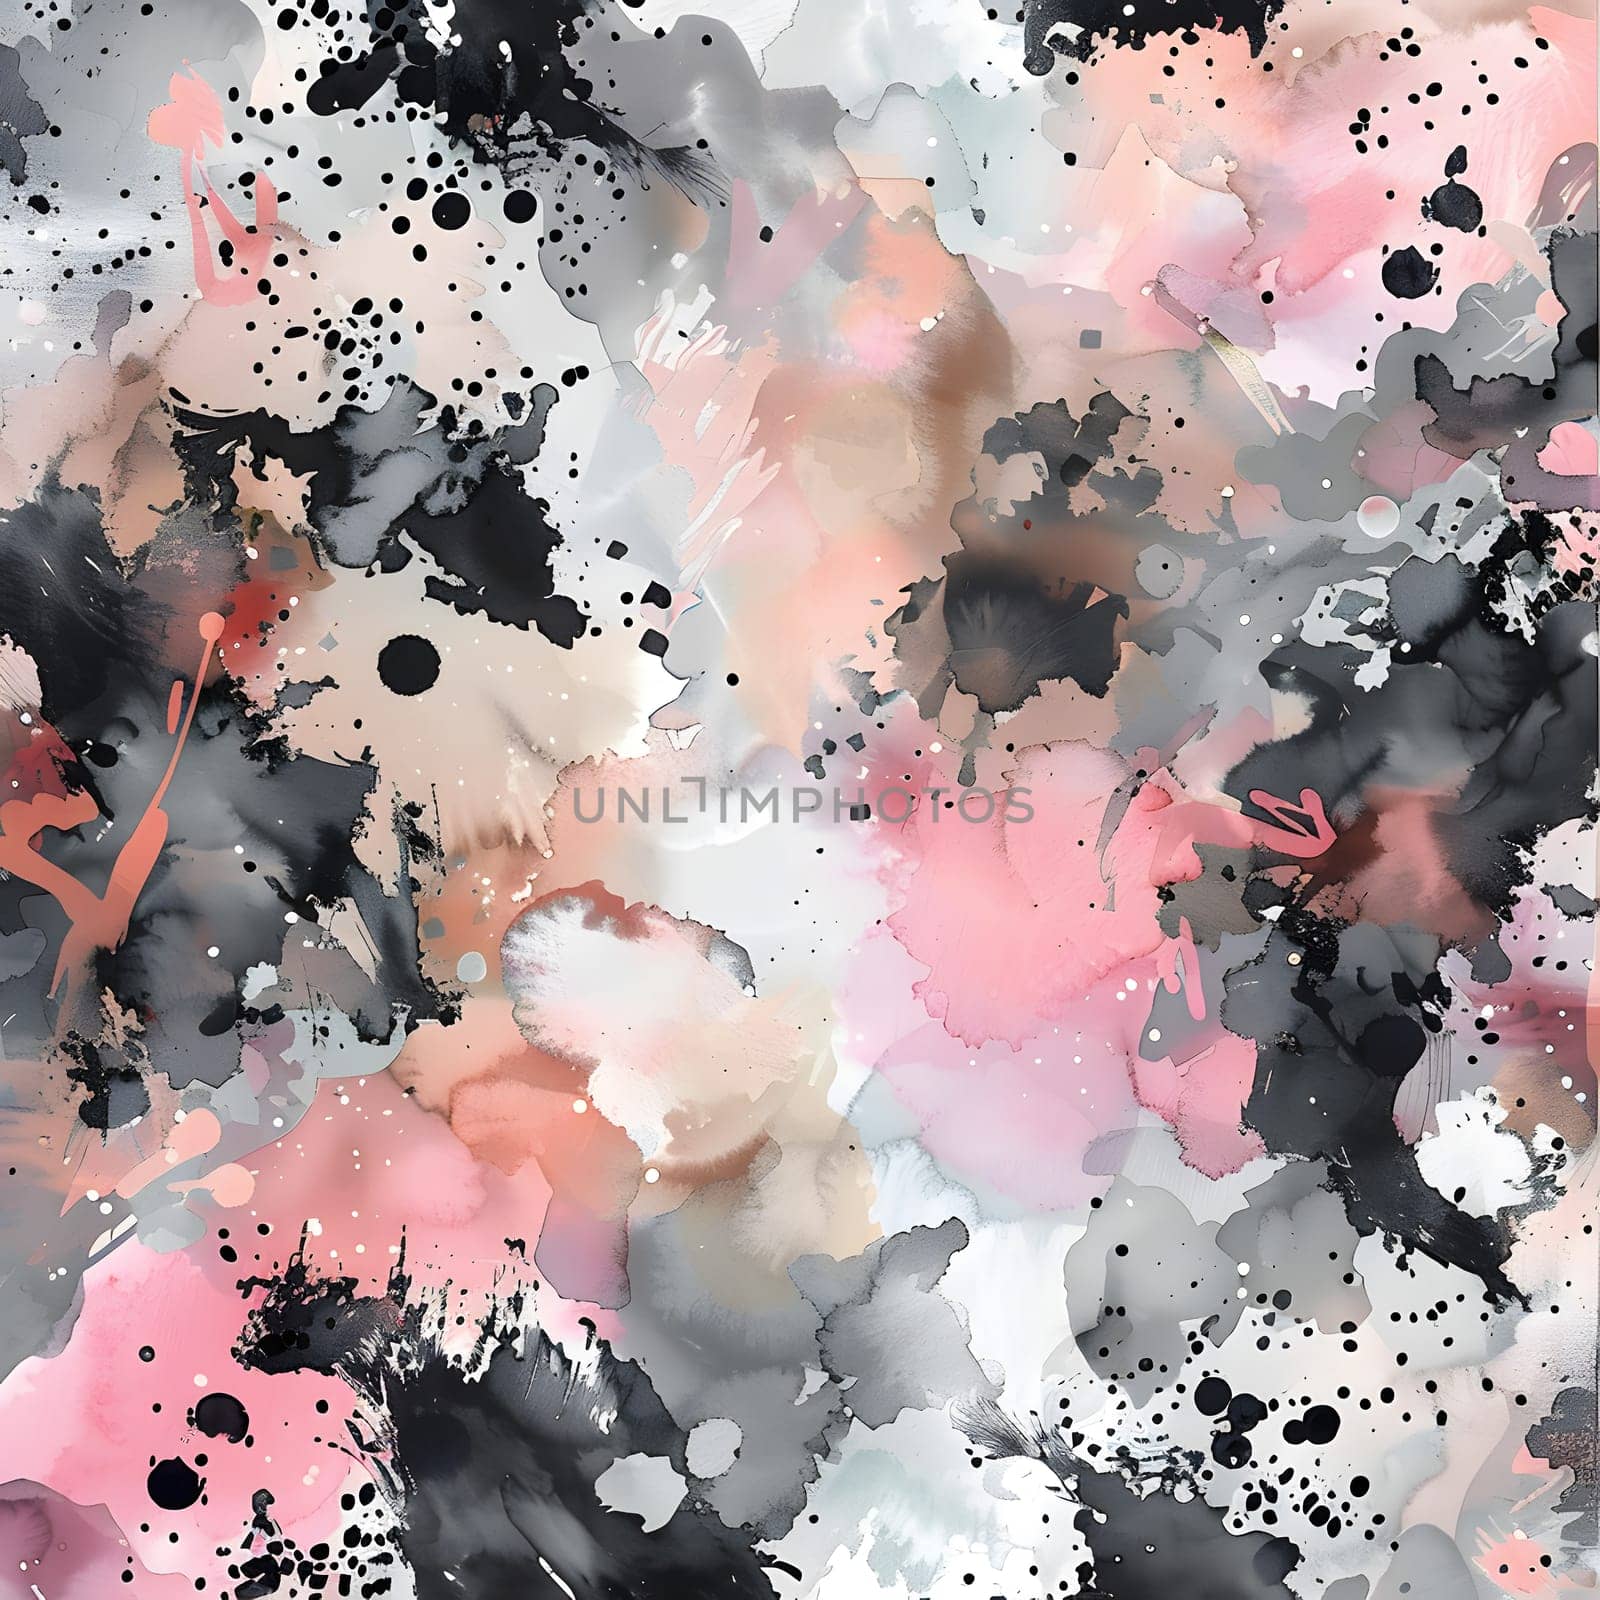 A vibrant mix of pink, black, and white paint splashes create a seamless pattern resembling petals on a white canvas. This artistic design brings a touch of magenta to the world of art